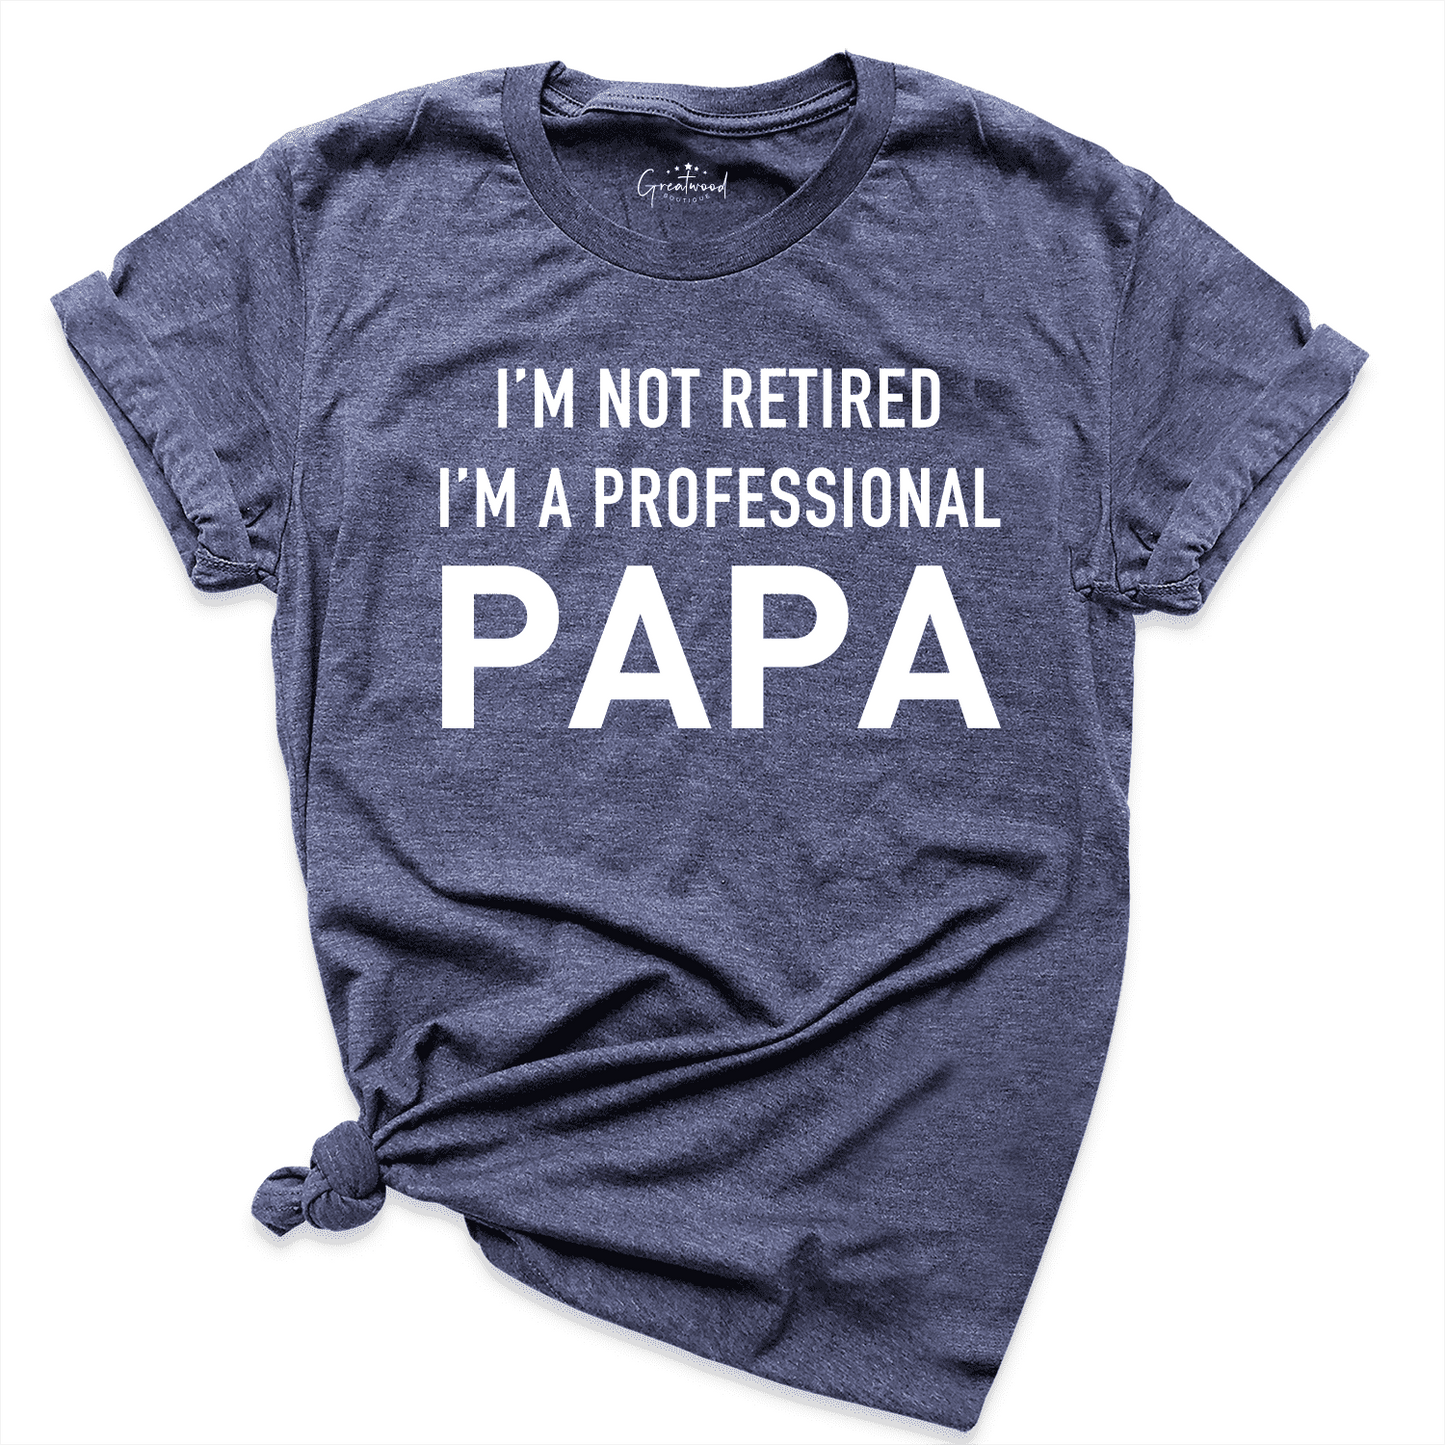 I'm Not Retired I'm a Professional Papa Shirt Navy - Greatwood Boutique